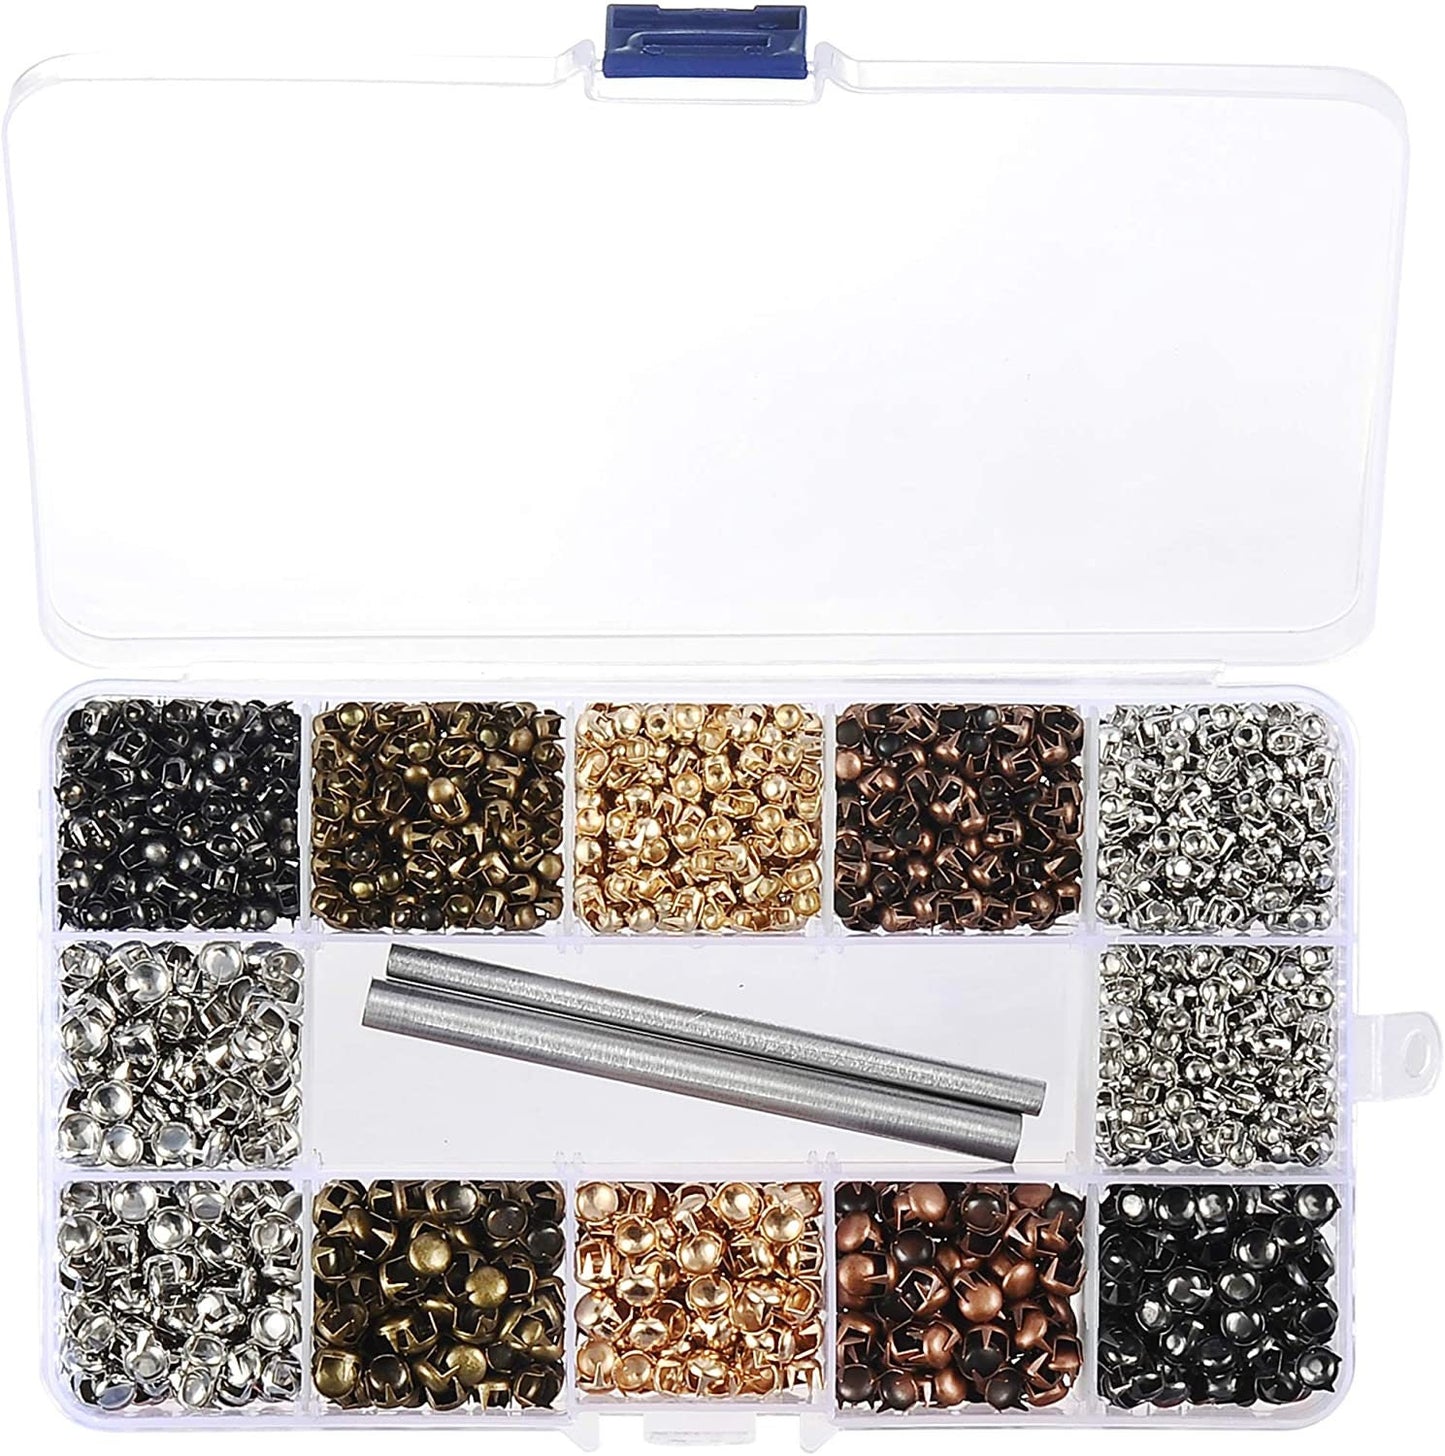 Nailhead Rivet Kit - Dome Stud Prong Rivet Kit - 2700 pieces with spot setting tools and carry case